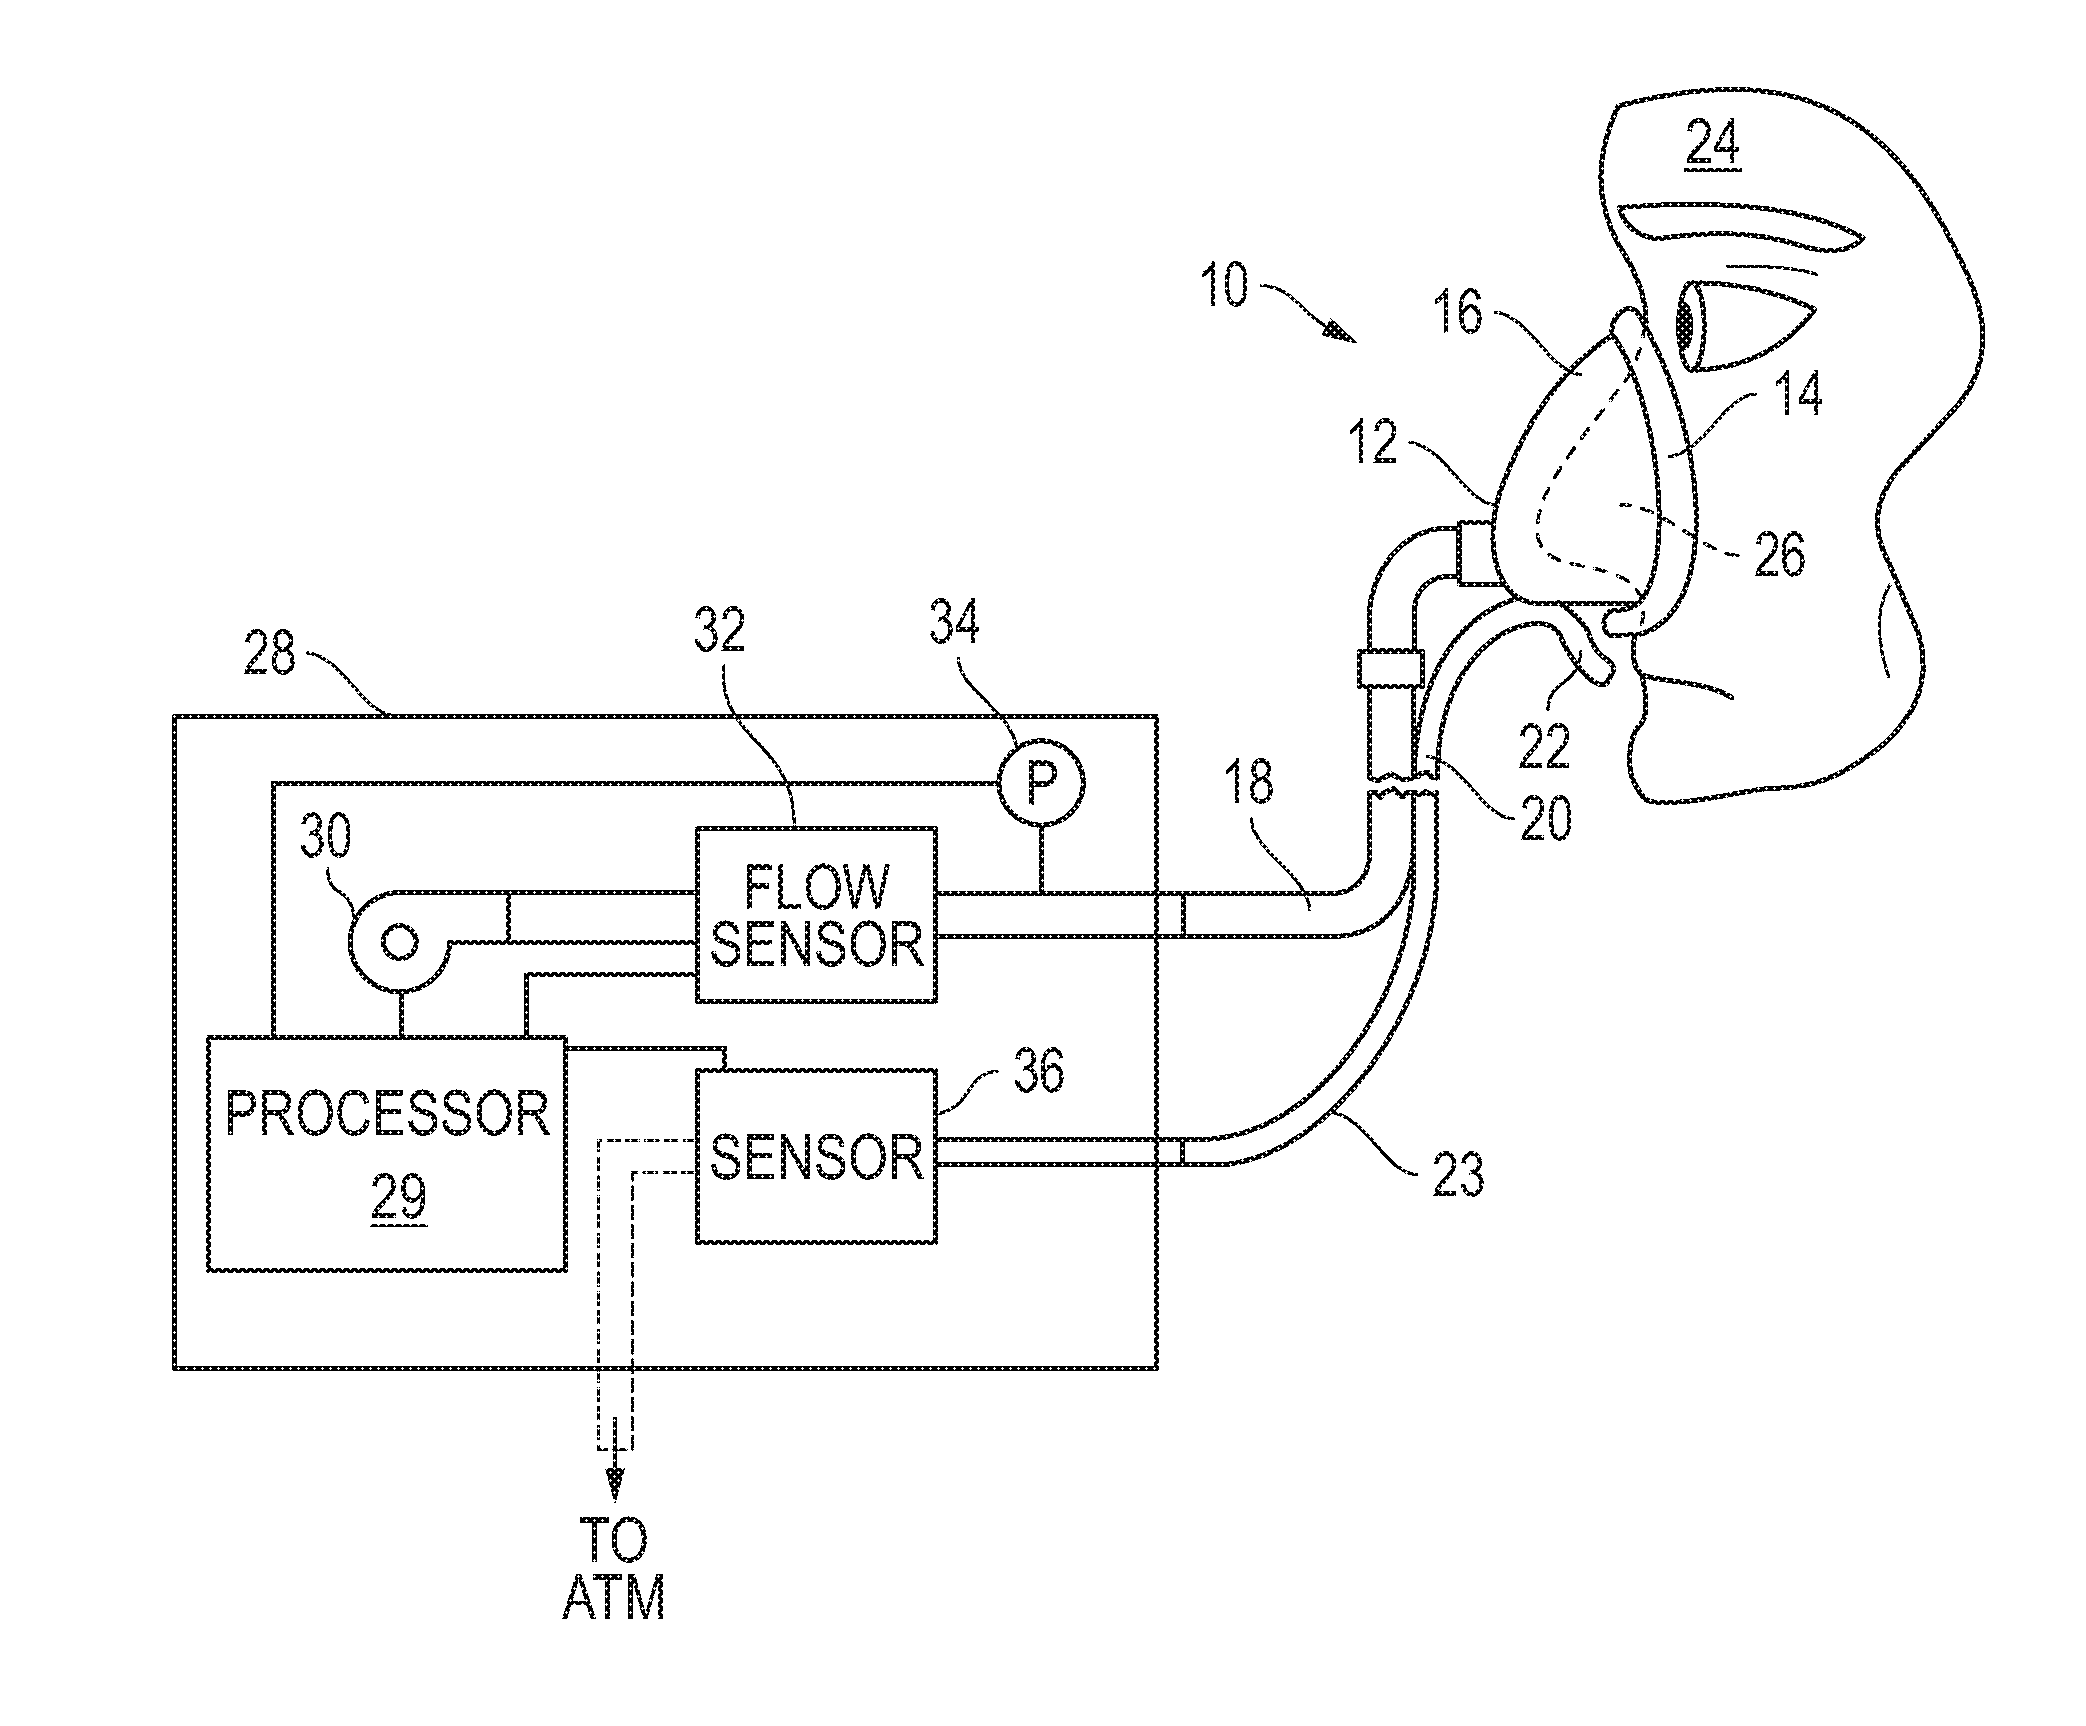 Method and System for Detecting Mouth Leak During Application of Positive Airway Pressure